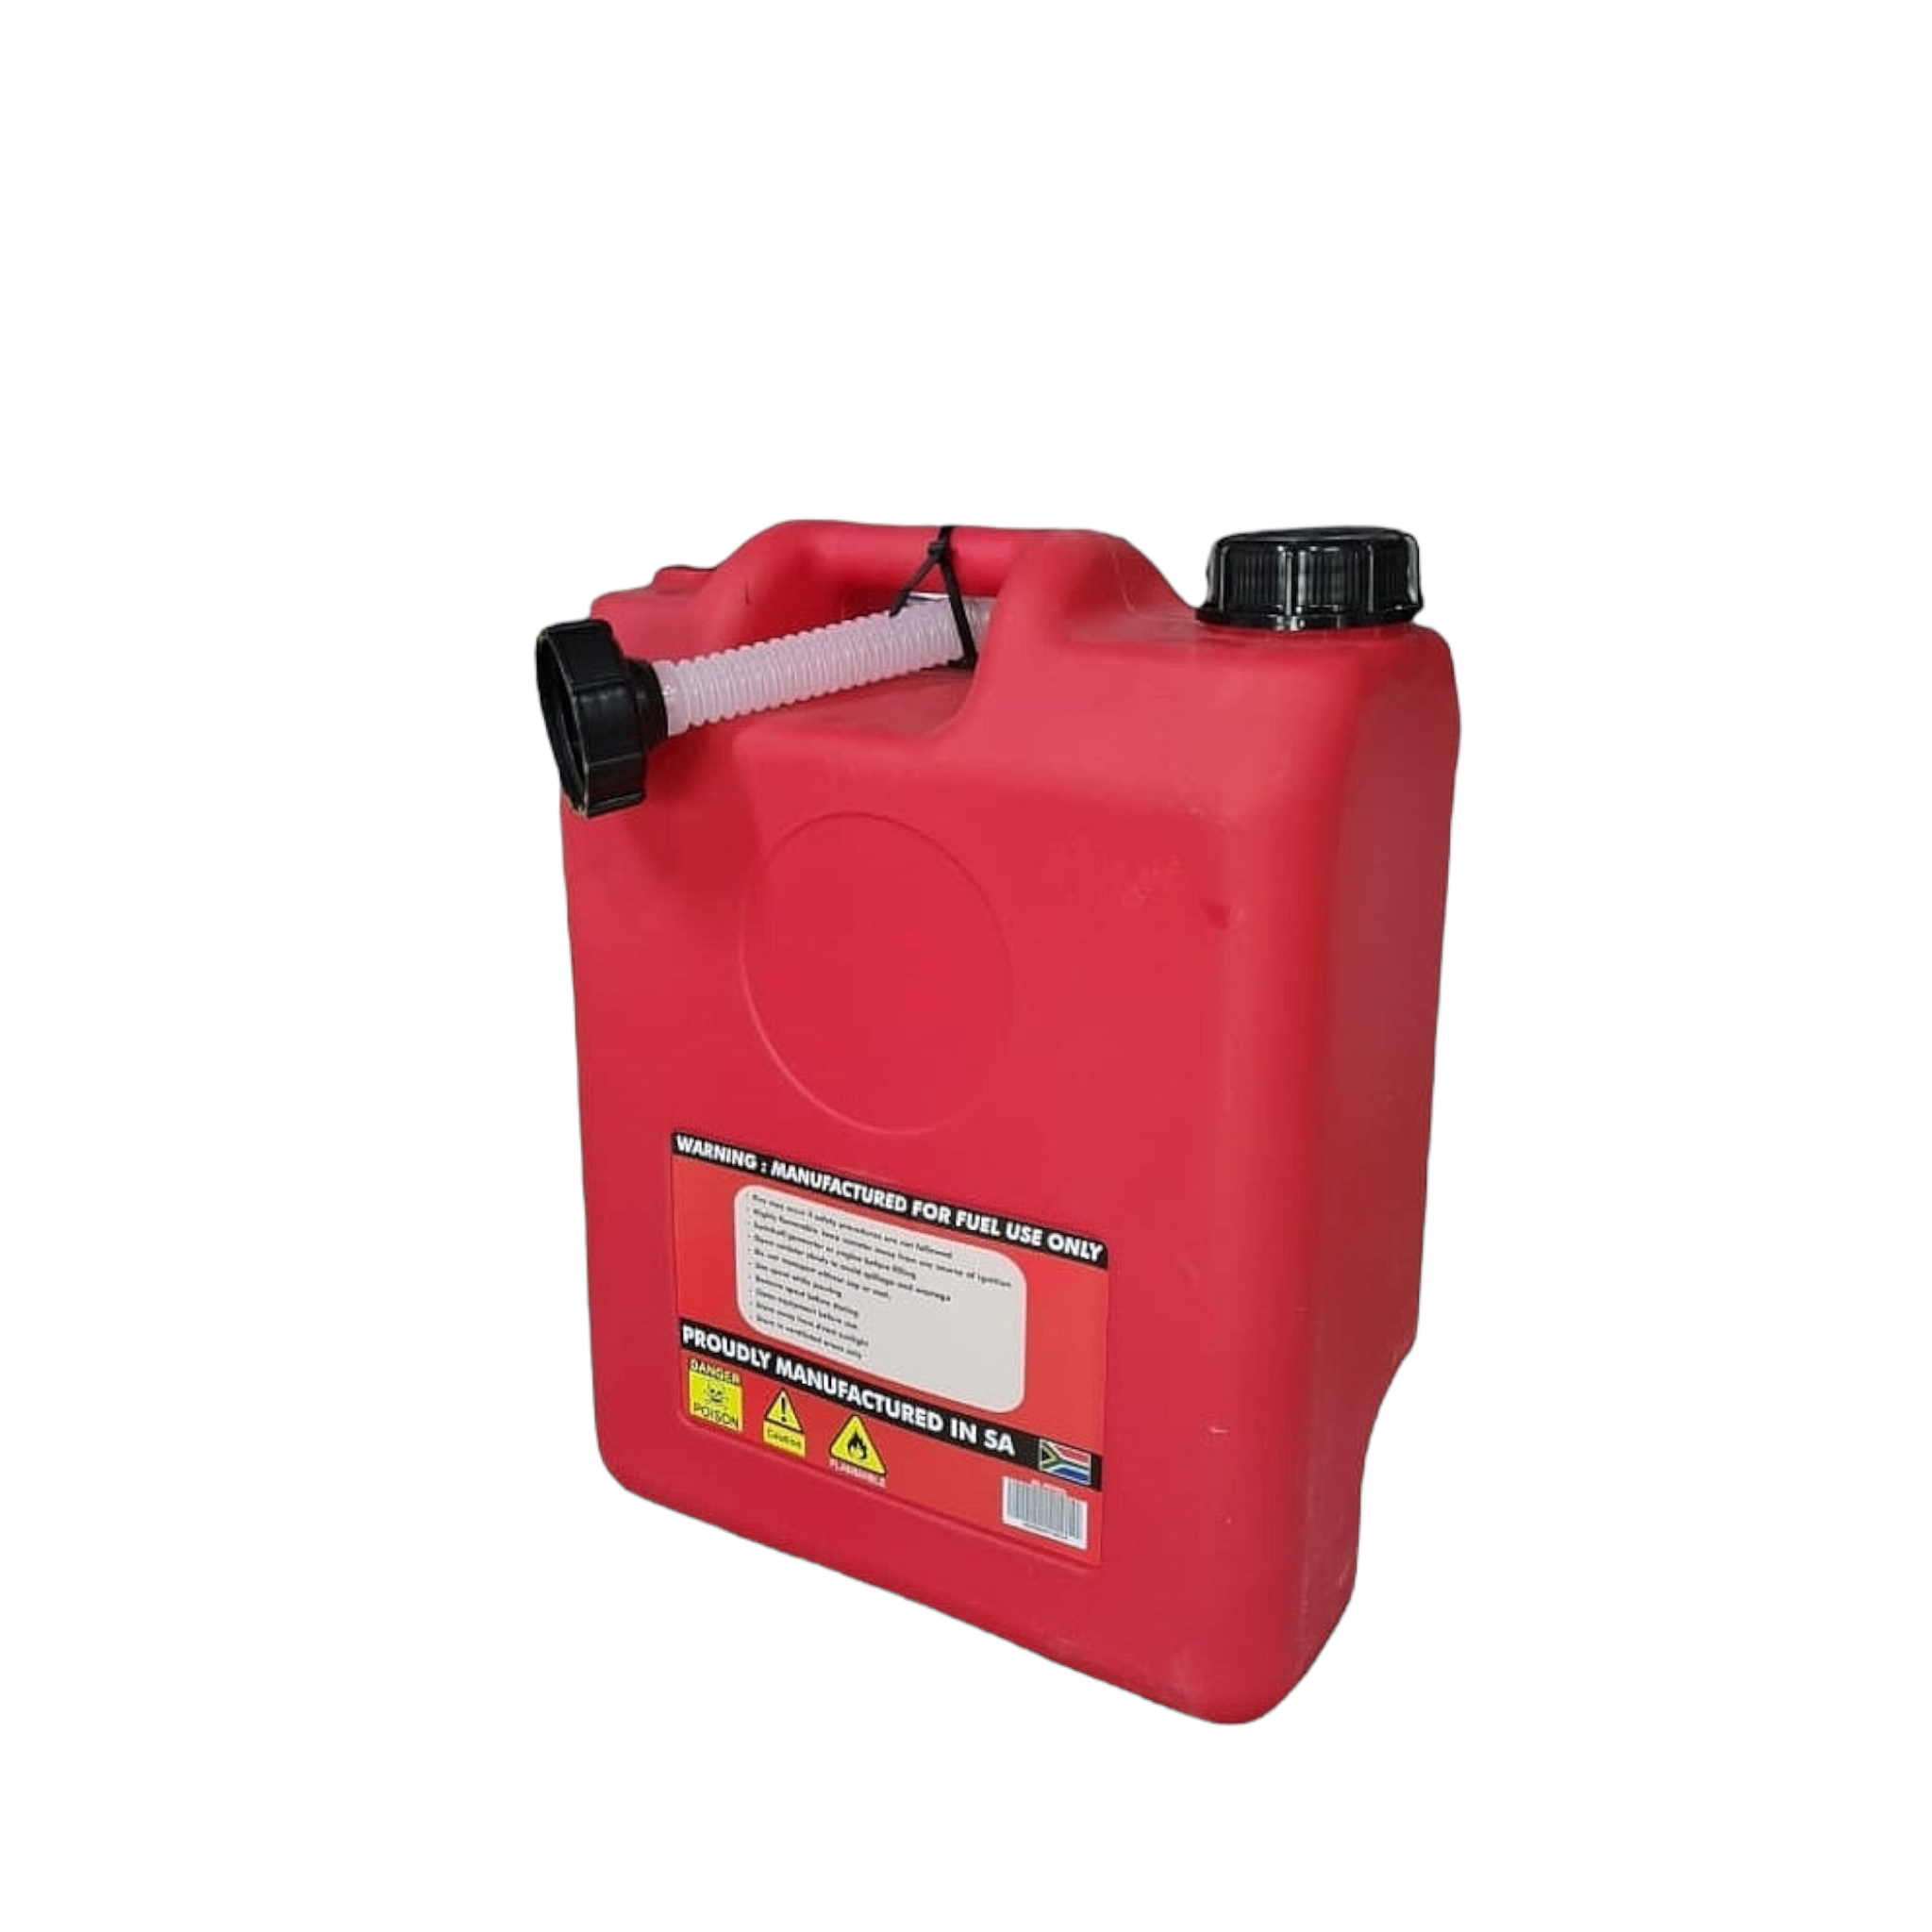 20L Plastic Fuel Jerry Can Petrol Red